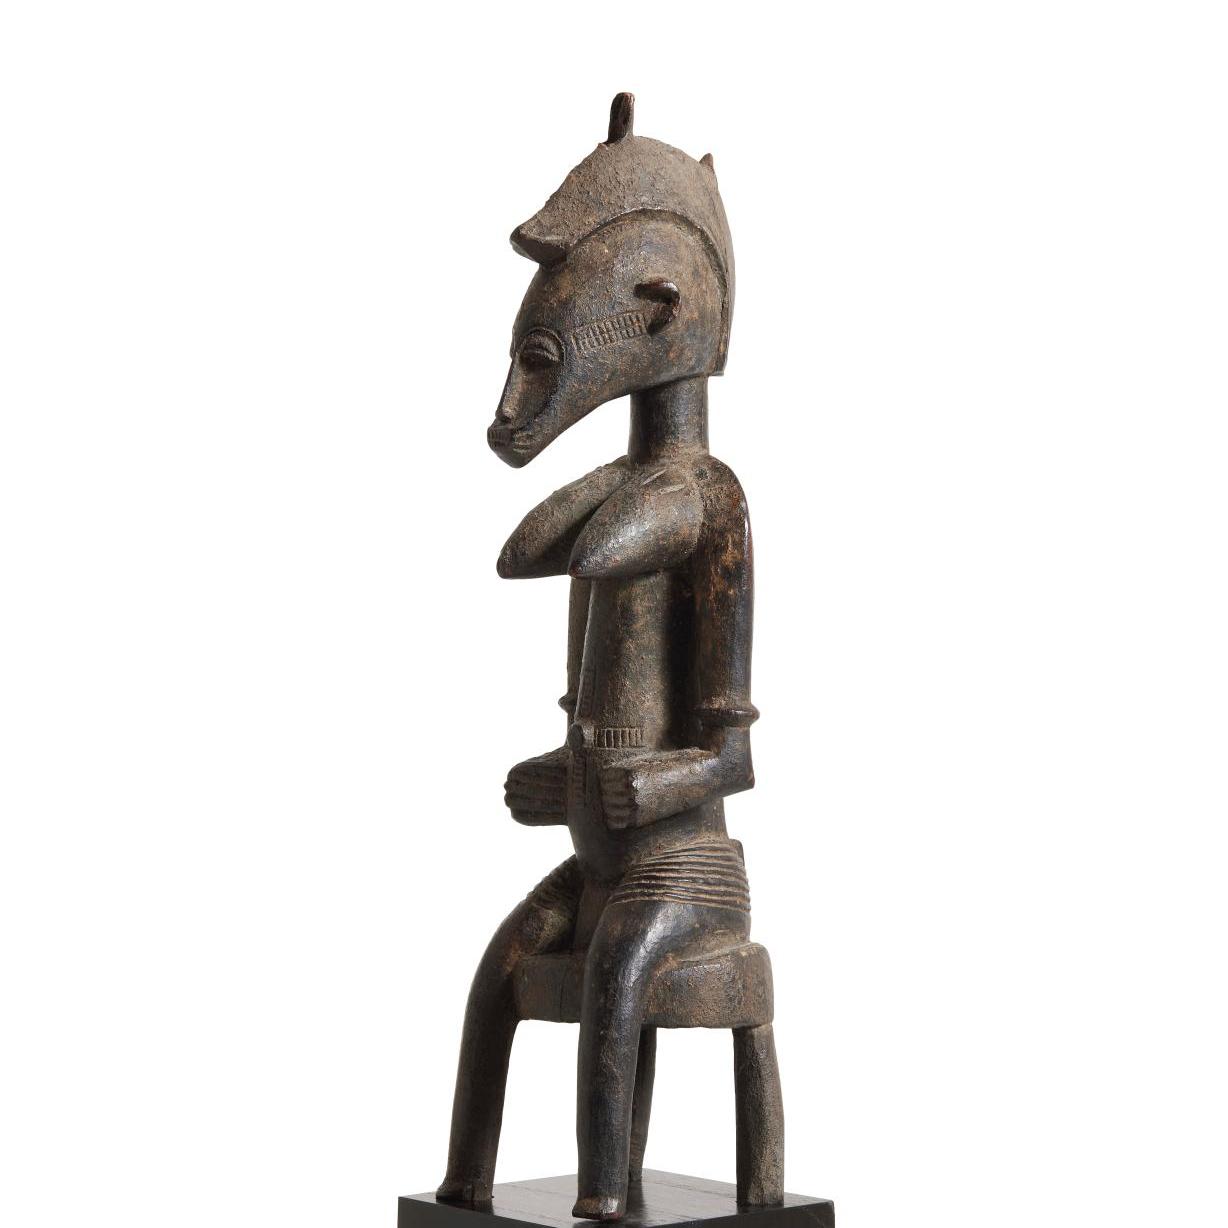 The World of Decorative Arts from Giacometti to African Sculpture